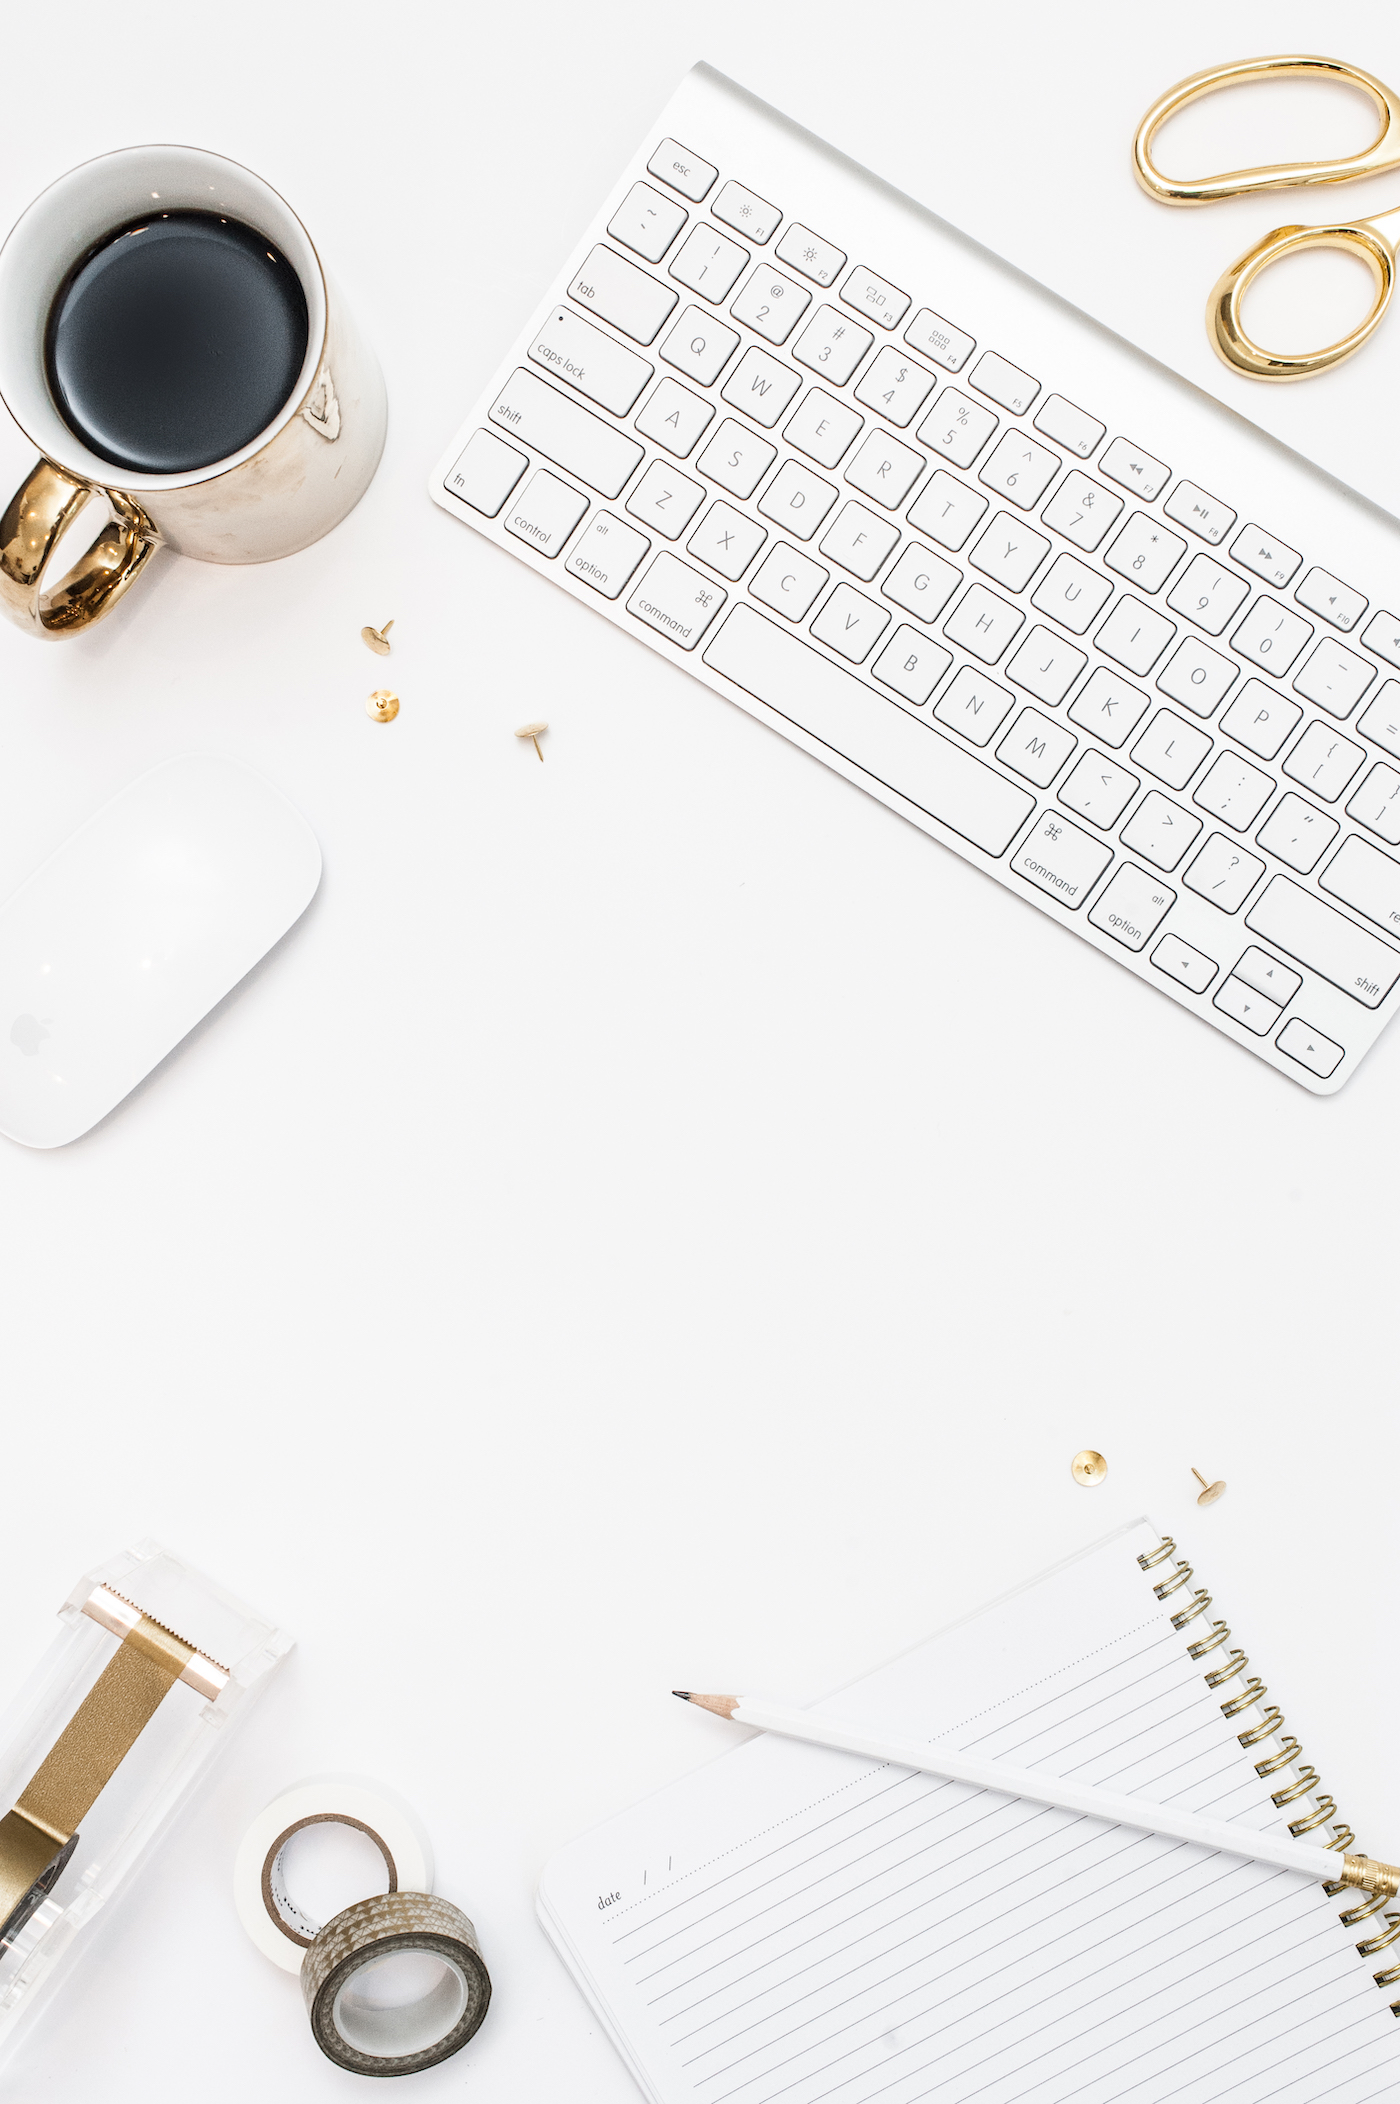 Why Every Virtual Assistant Needs A Blog - The Creative VA Academy | Virtual assistant training and digital courses for creatives